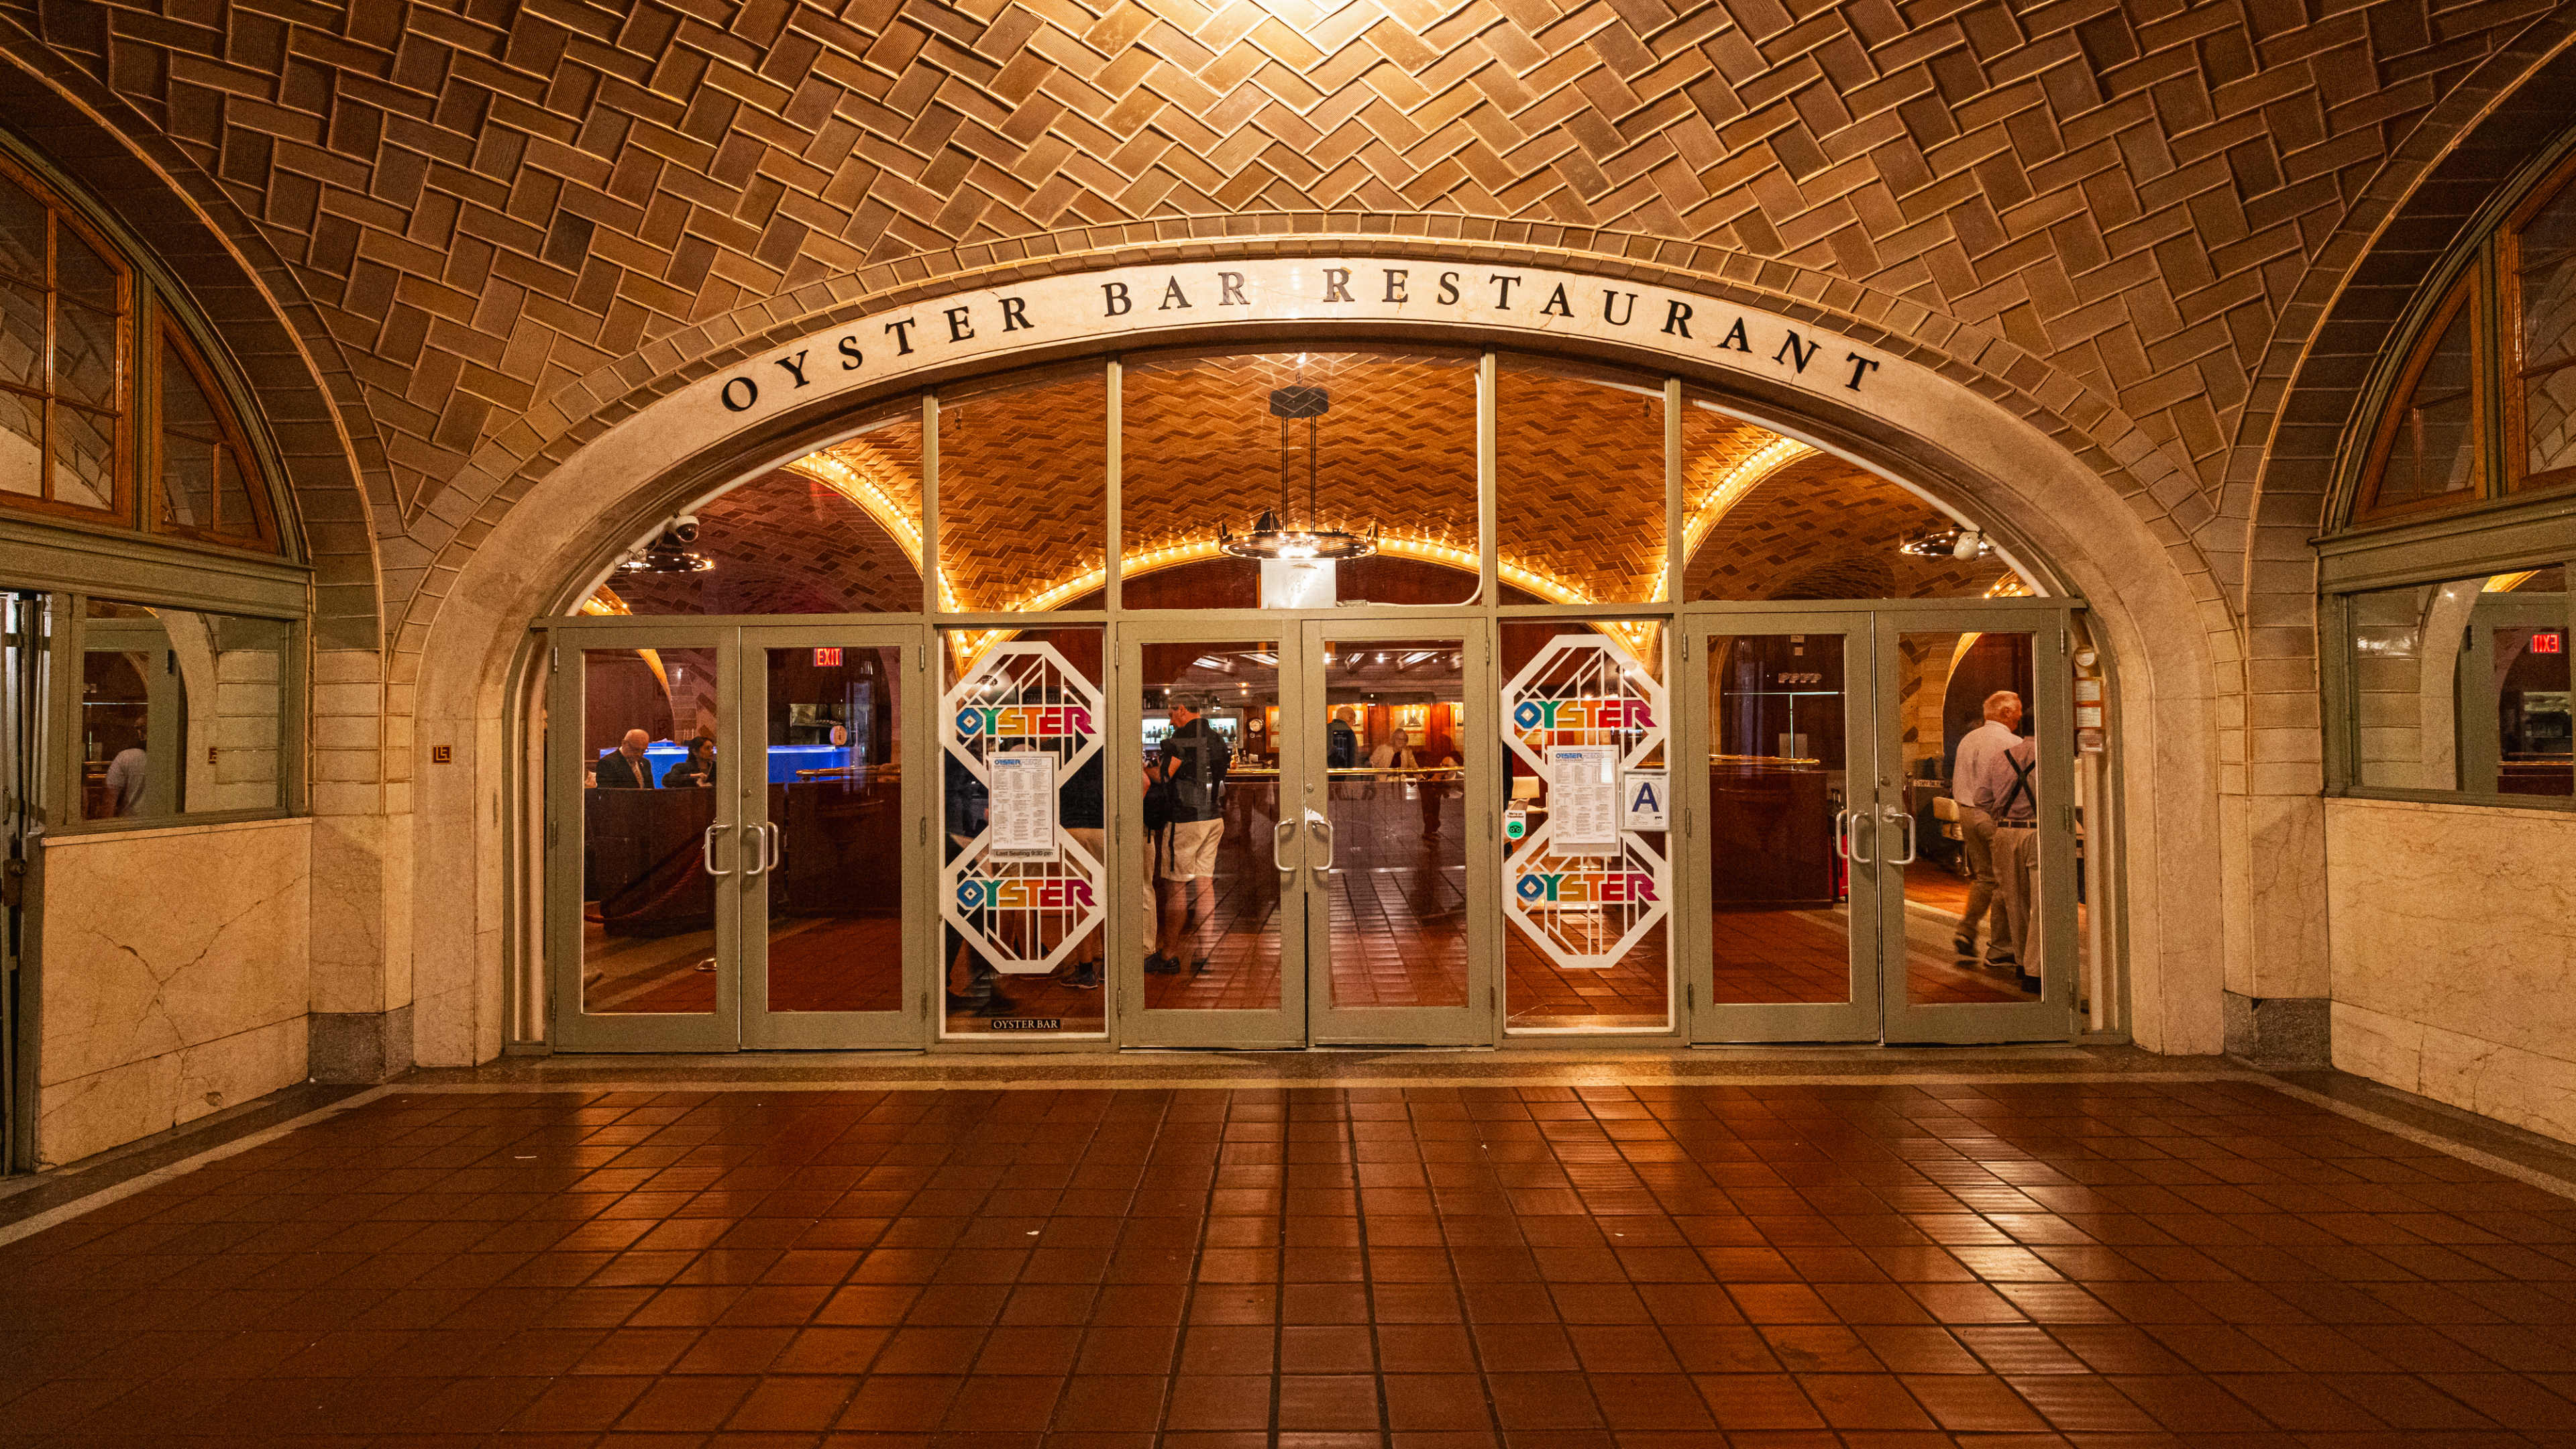 The exterior of Grand Central Oyster Bar.